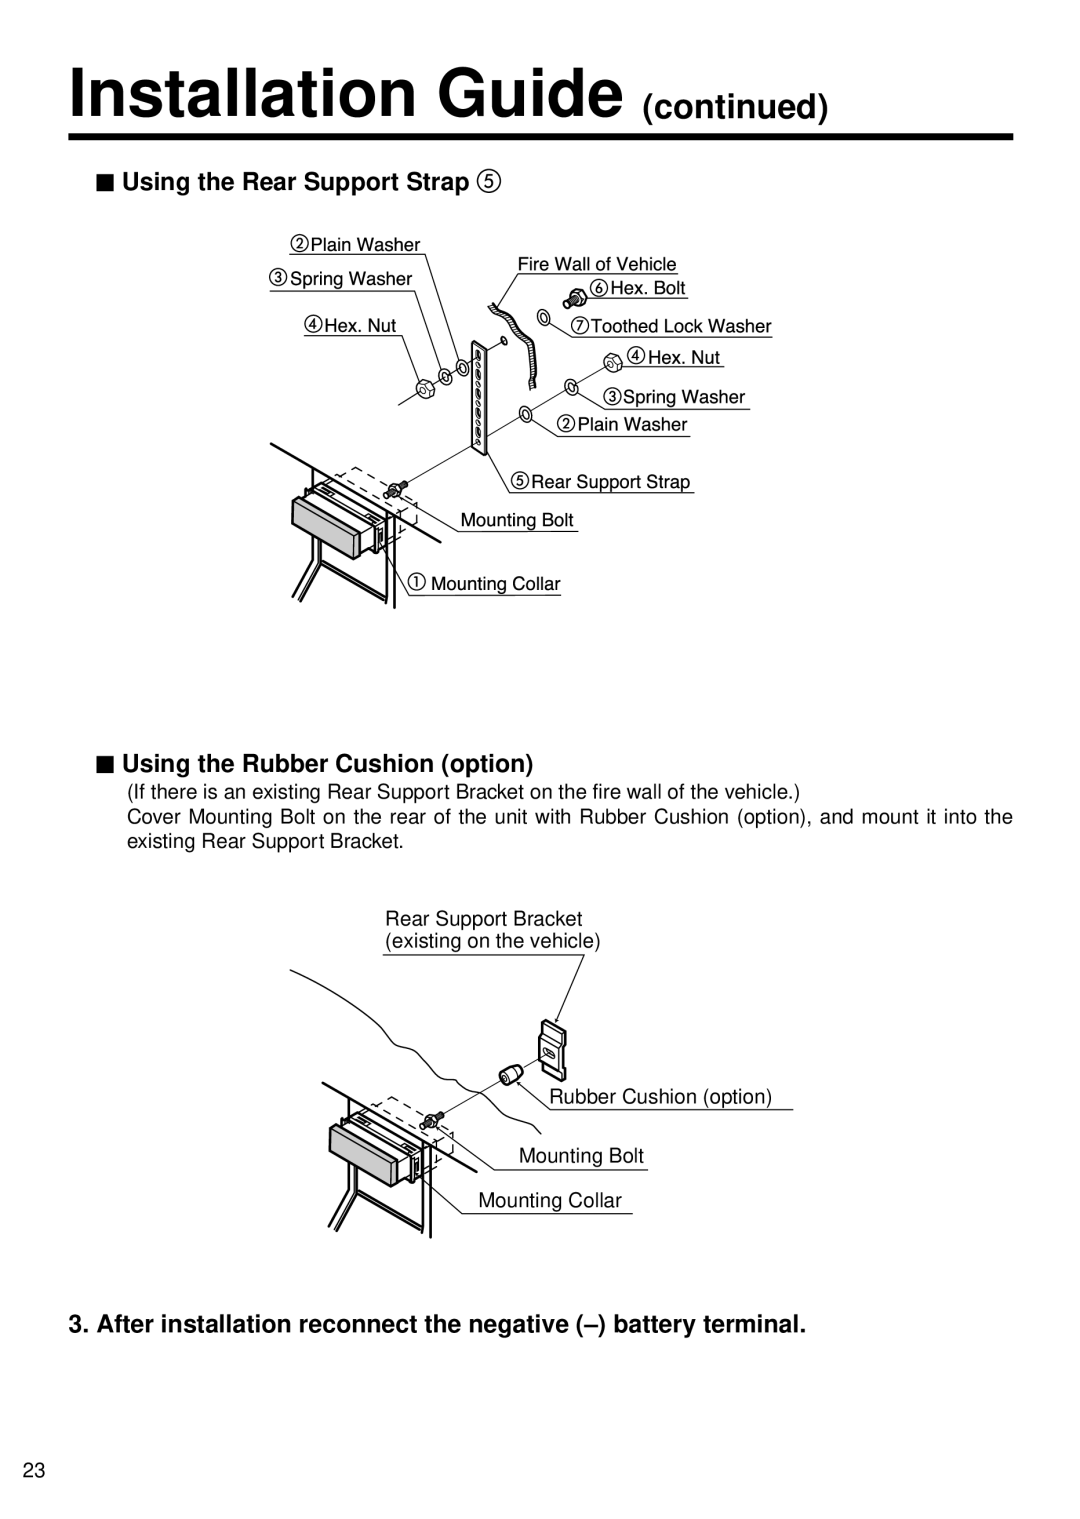 Panasonic CQ-5500U, 5300U manual Installation Guide continued, Using the Rear Support Strap, Using the Rubber Cushion option 